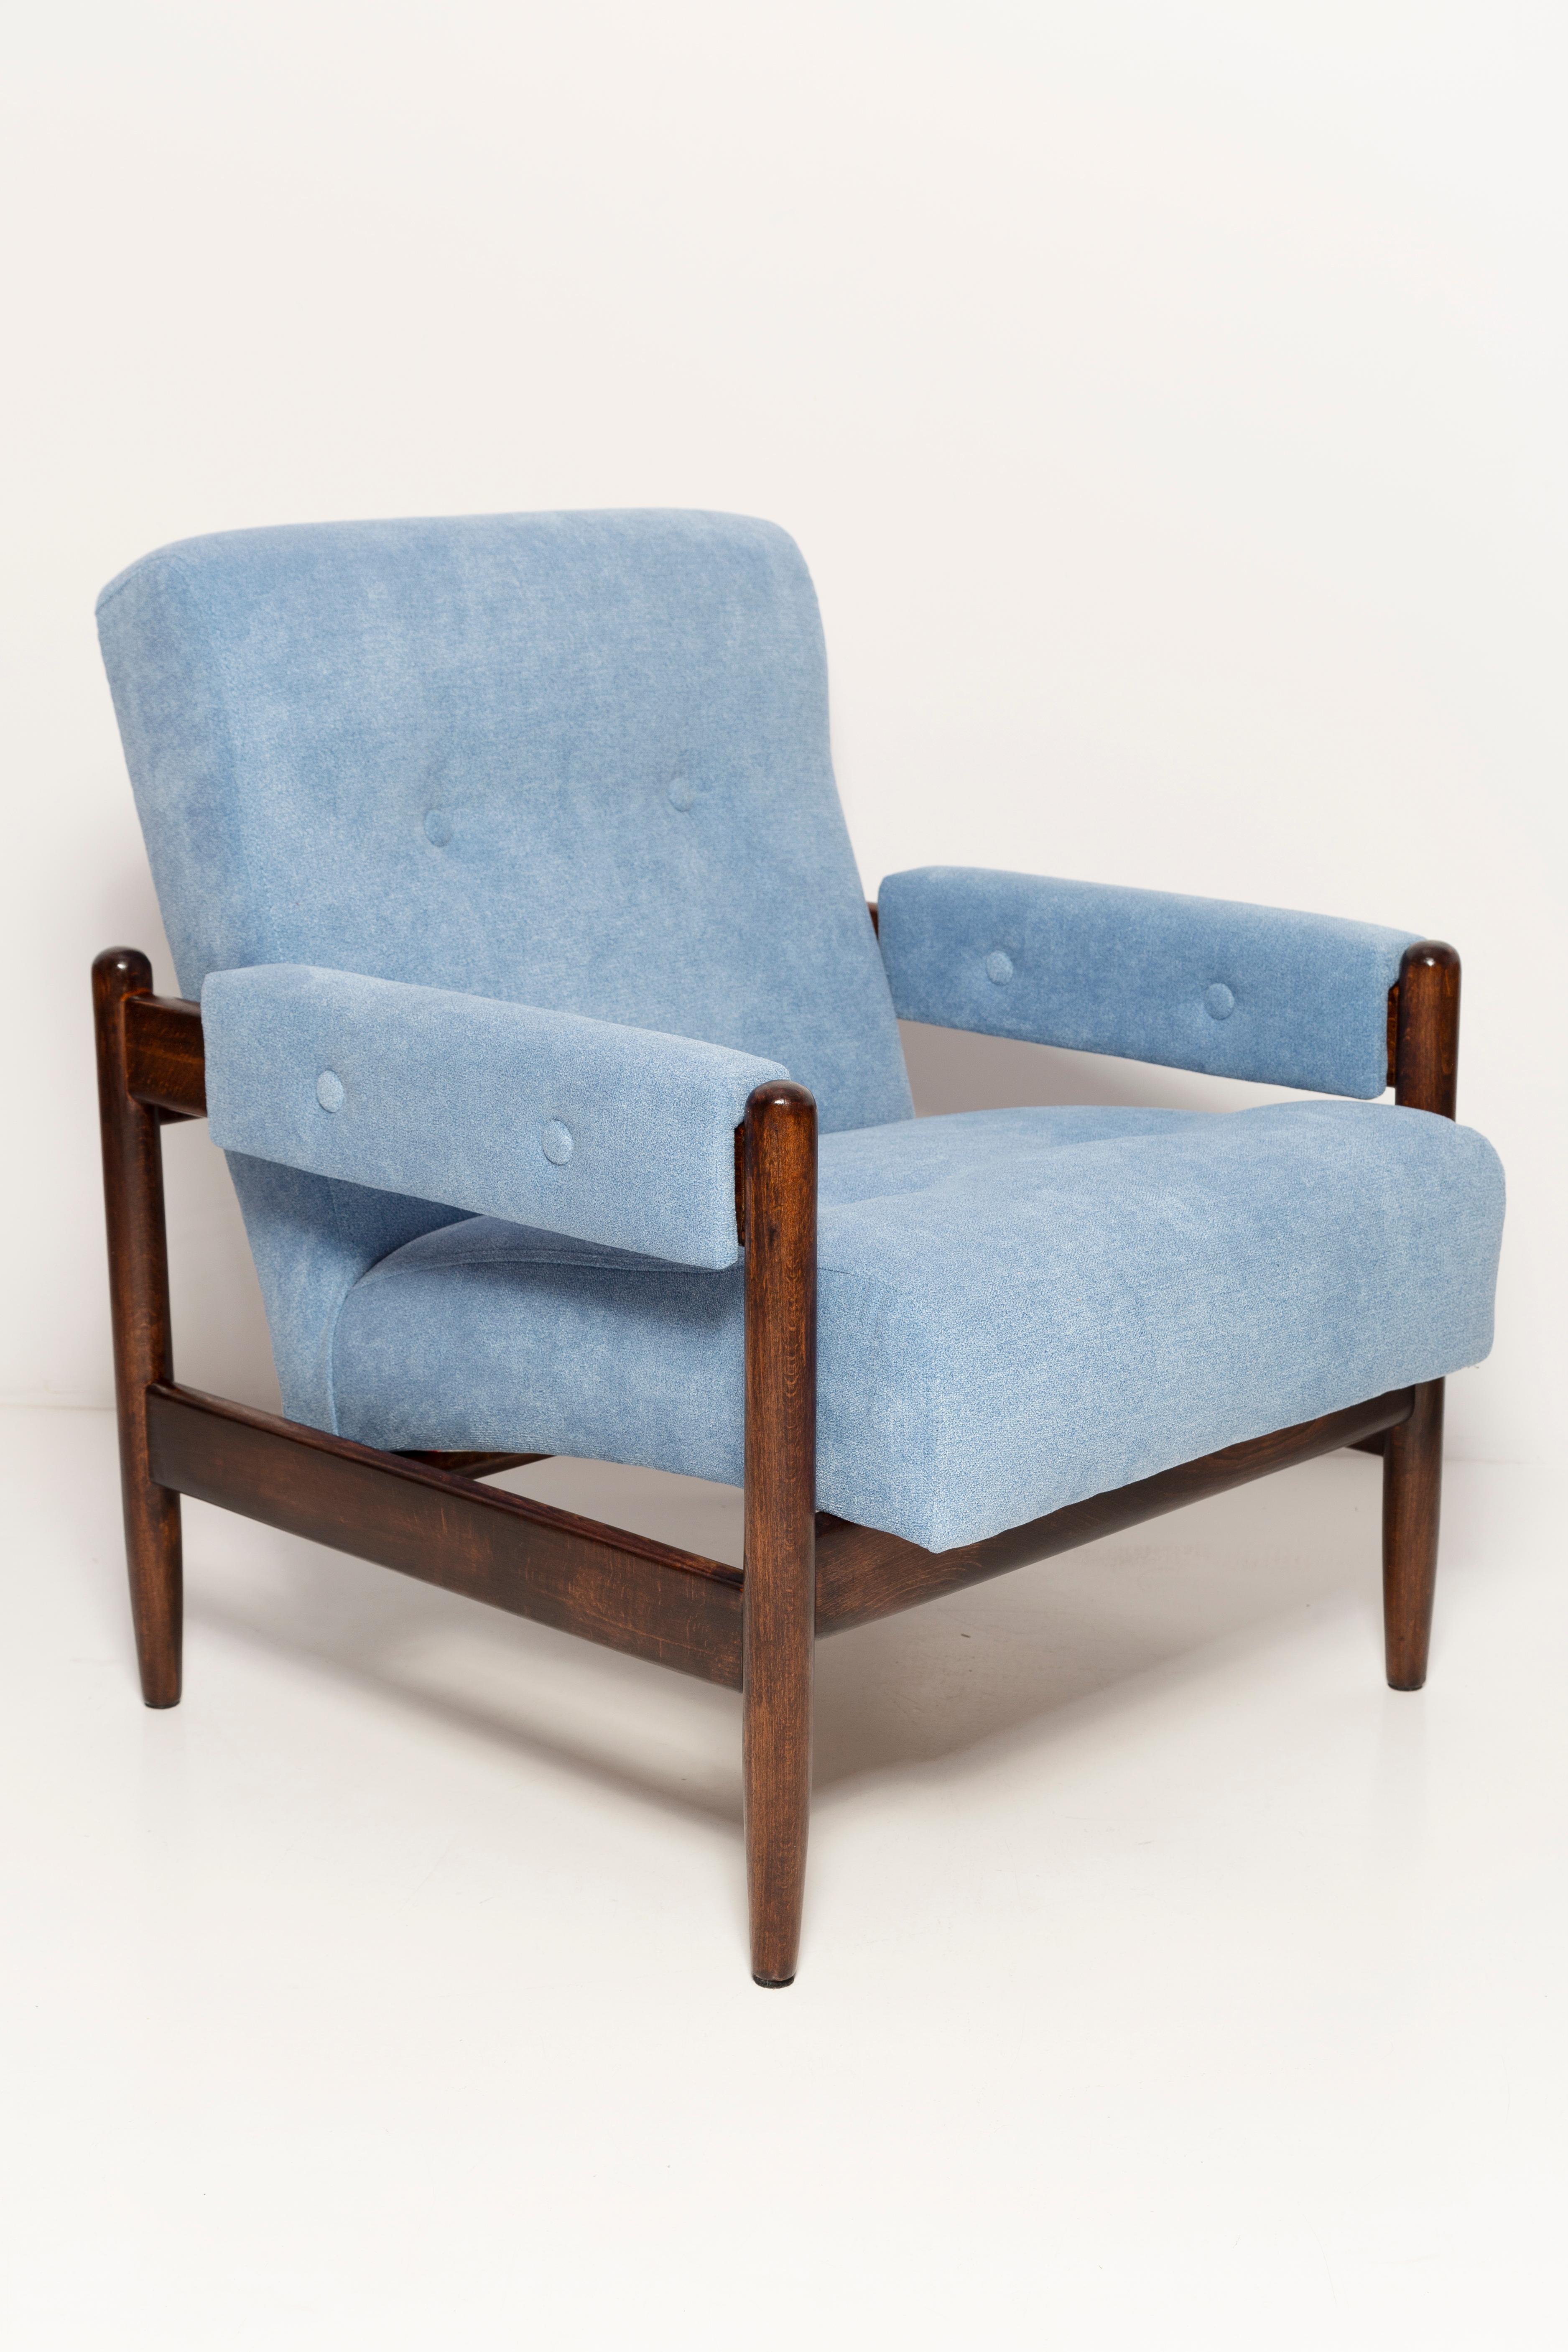 A wonderful armchair made in the 1960s in Poland. Stabile design of the furniture and a comfortable seat. Furniture after full upholstery renovation, refreshed woodwork. The whole is covered with high quality thick, pleasant to the touch fabric. The